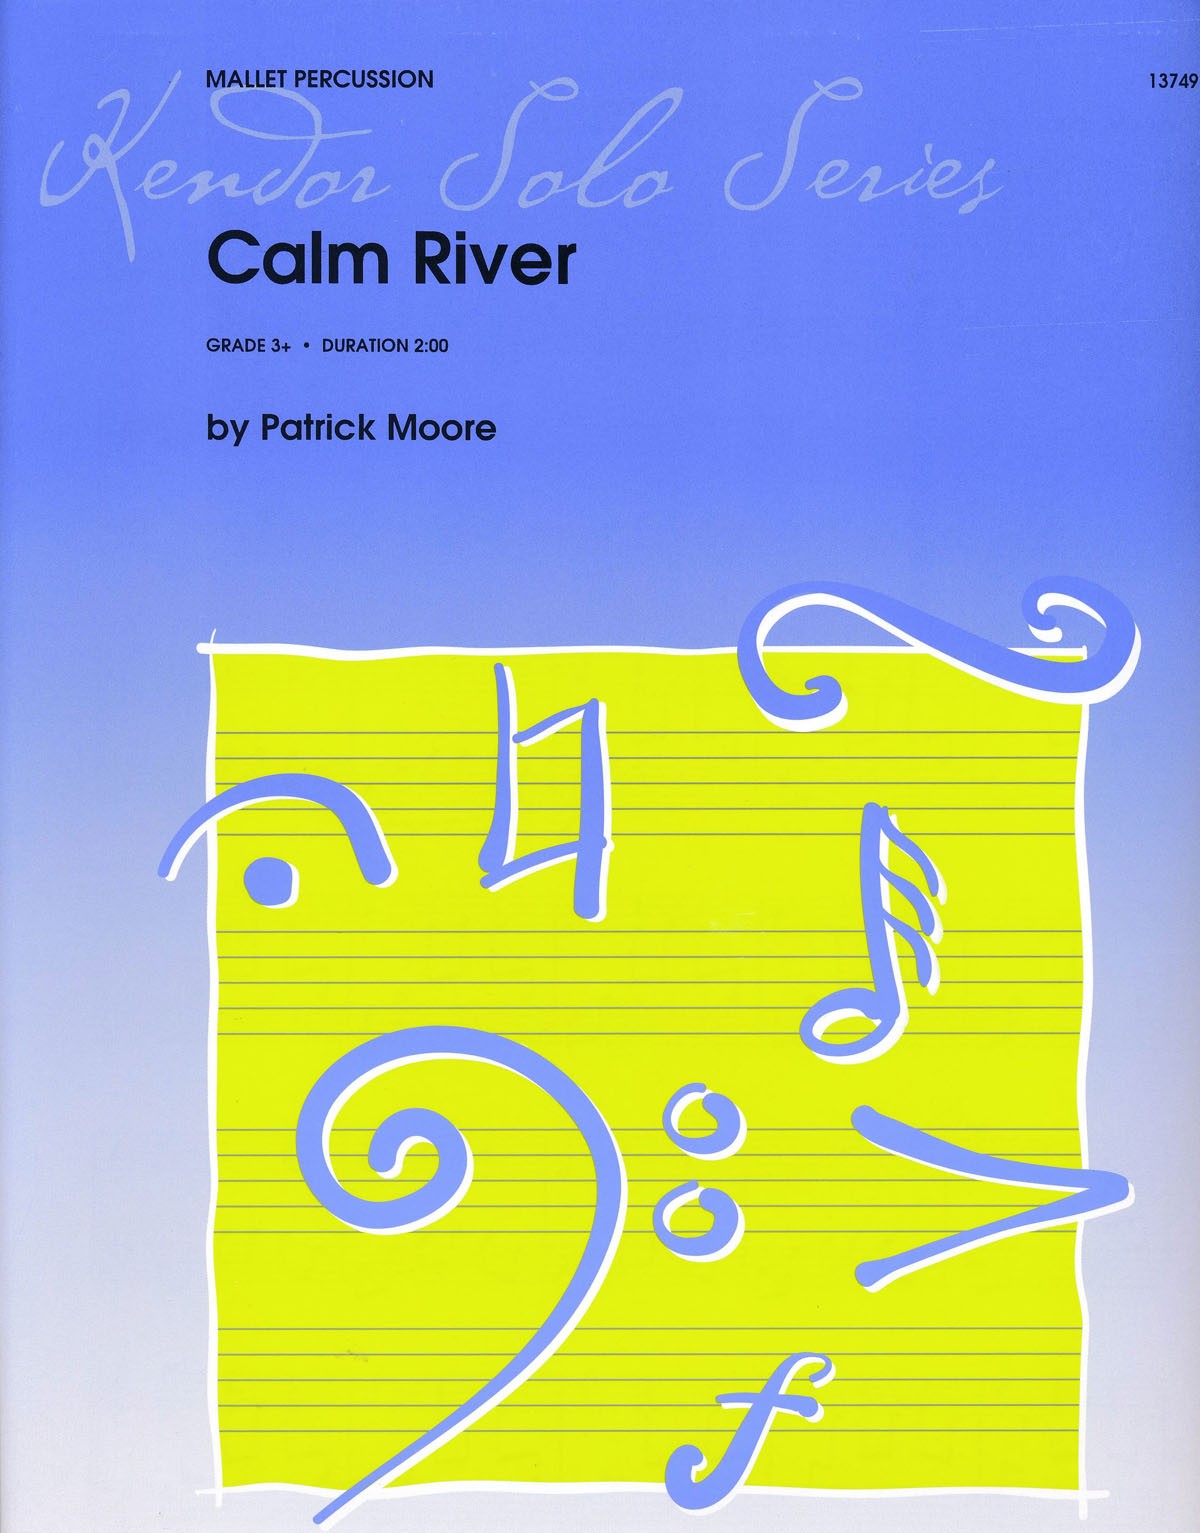 Calm River by Patrick Moore